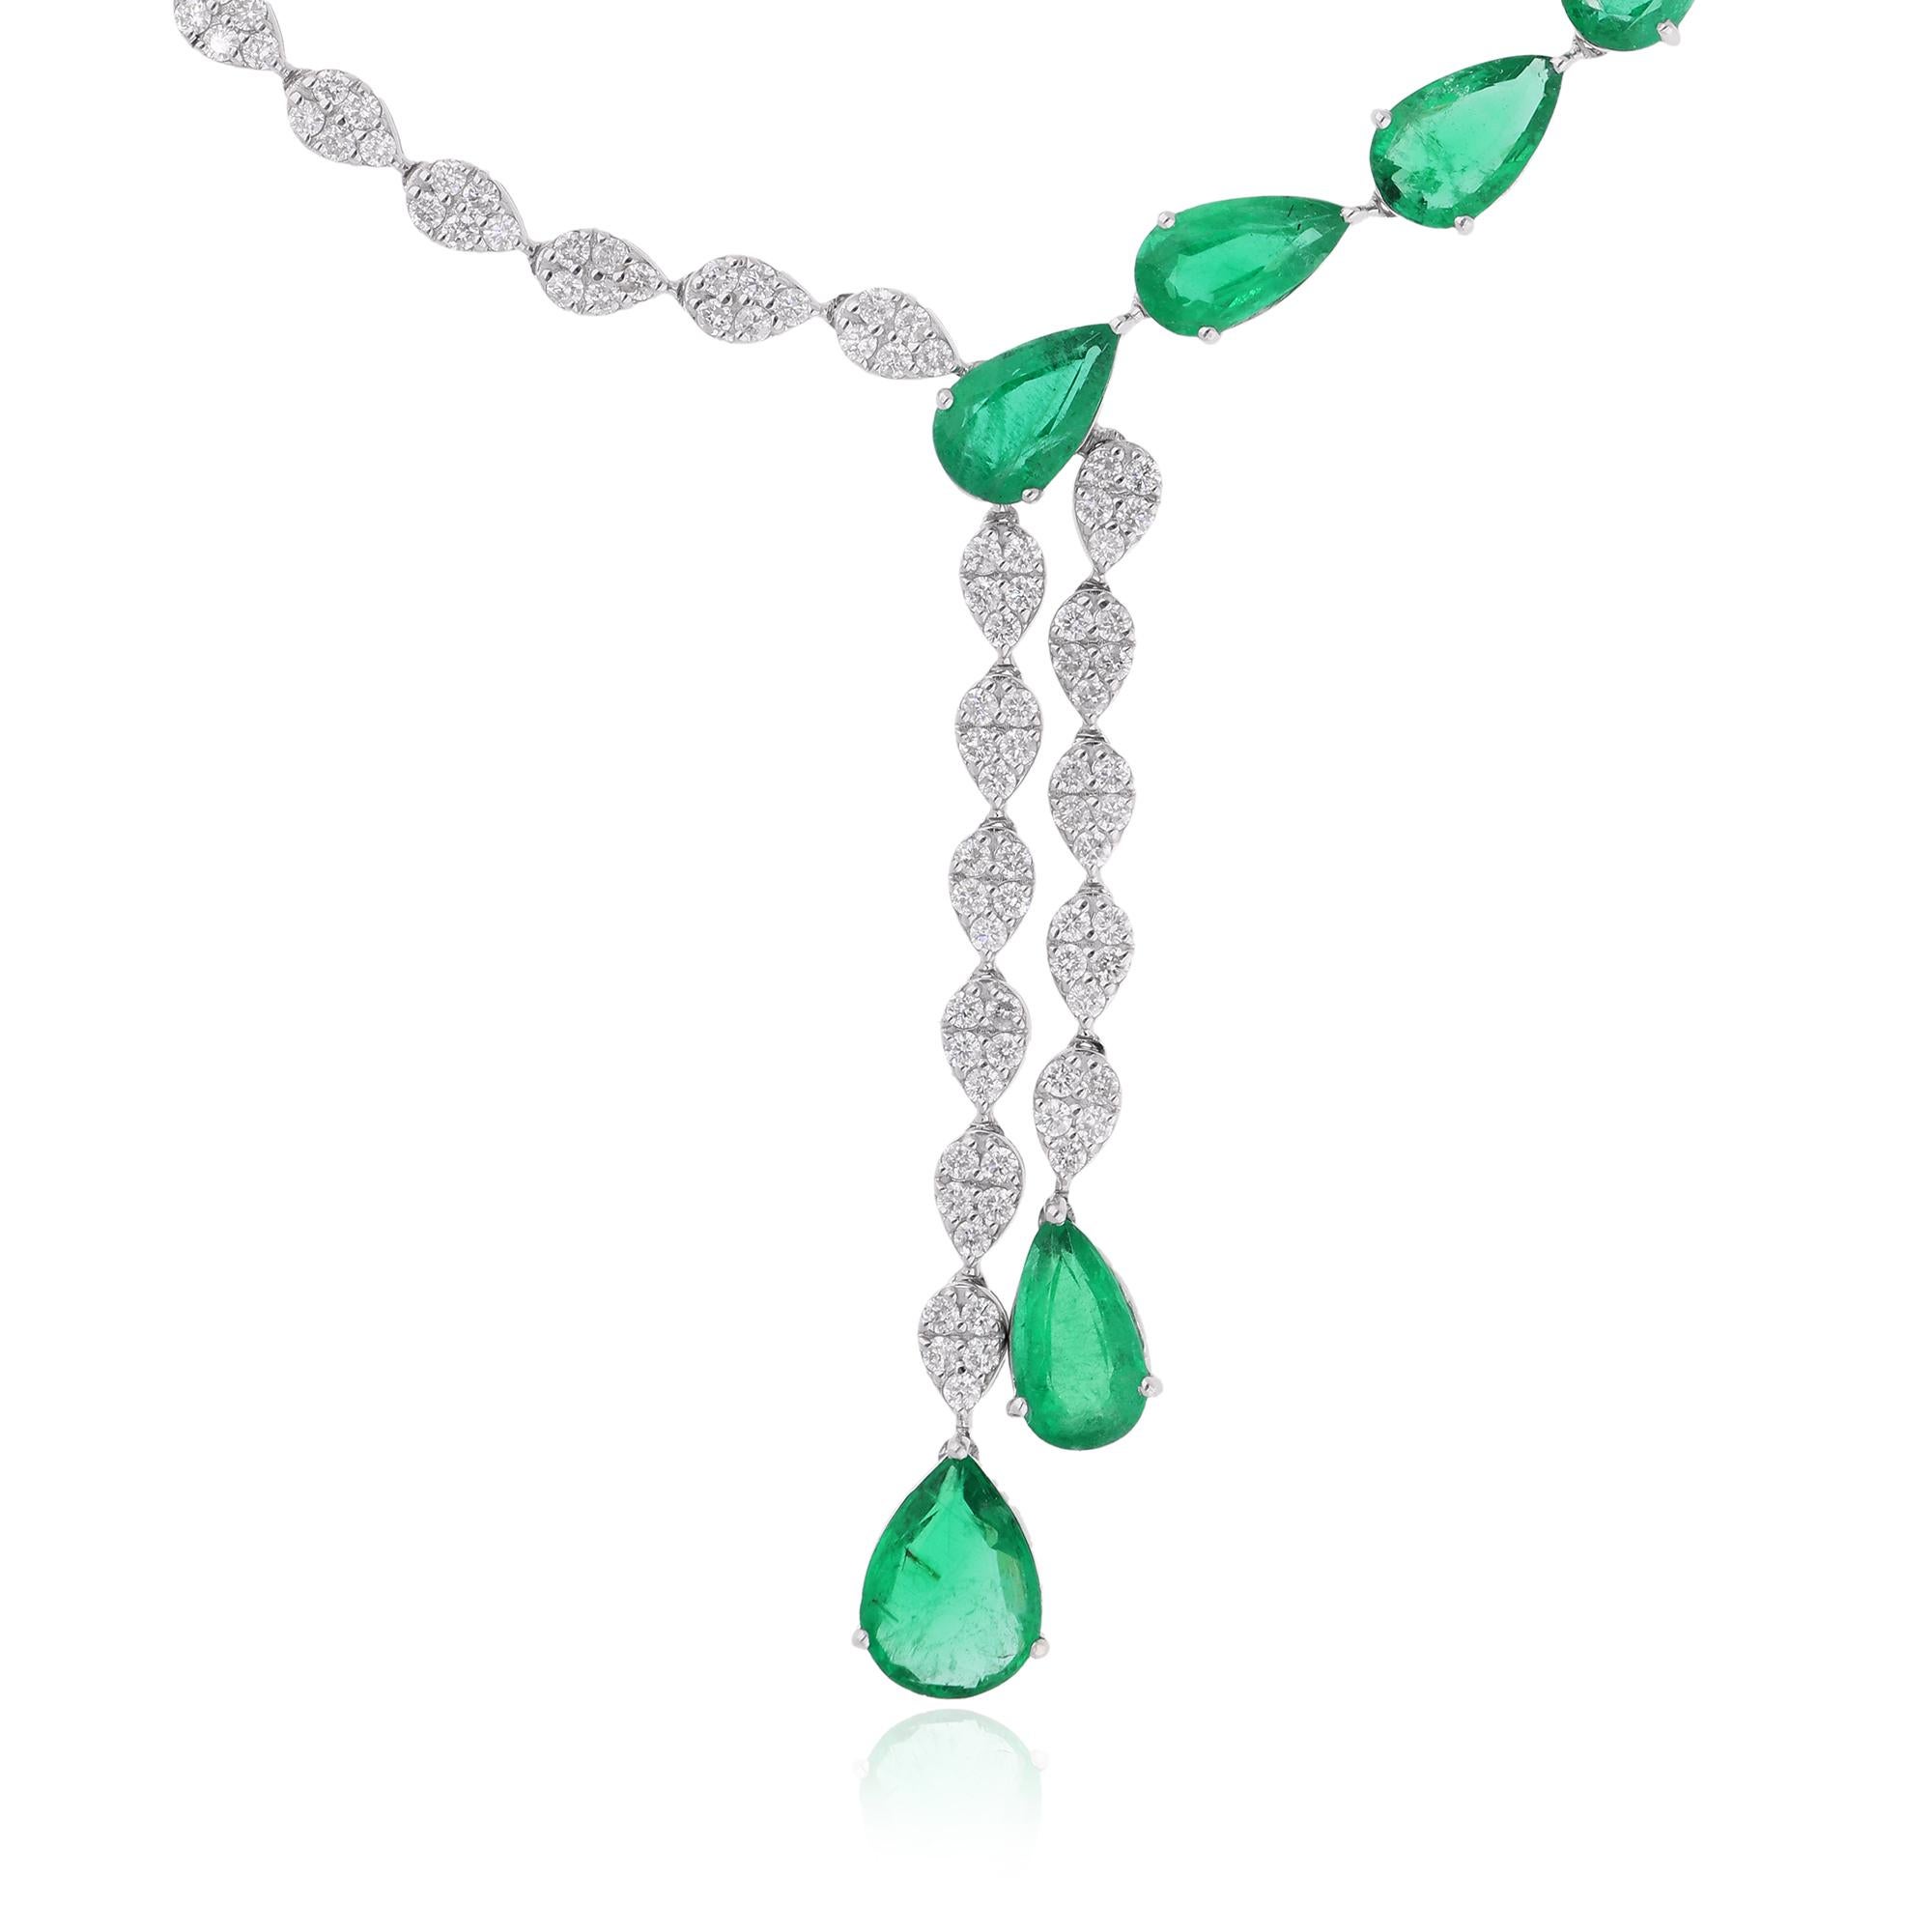 Surrounding the emerald are shimmering diamonds, meticulously set to accentuate the allure of the central gemstone. The brilliance of the diamonds adds a touch of glamour and sophistication to the design, elevating it to new heights of